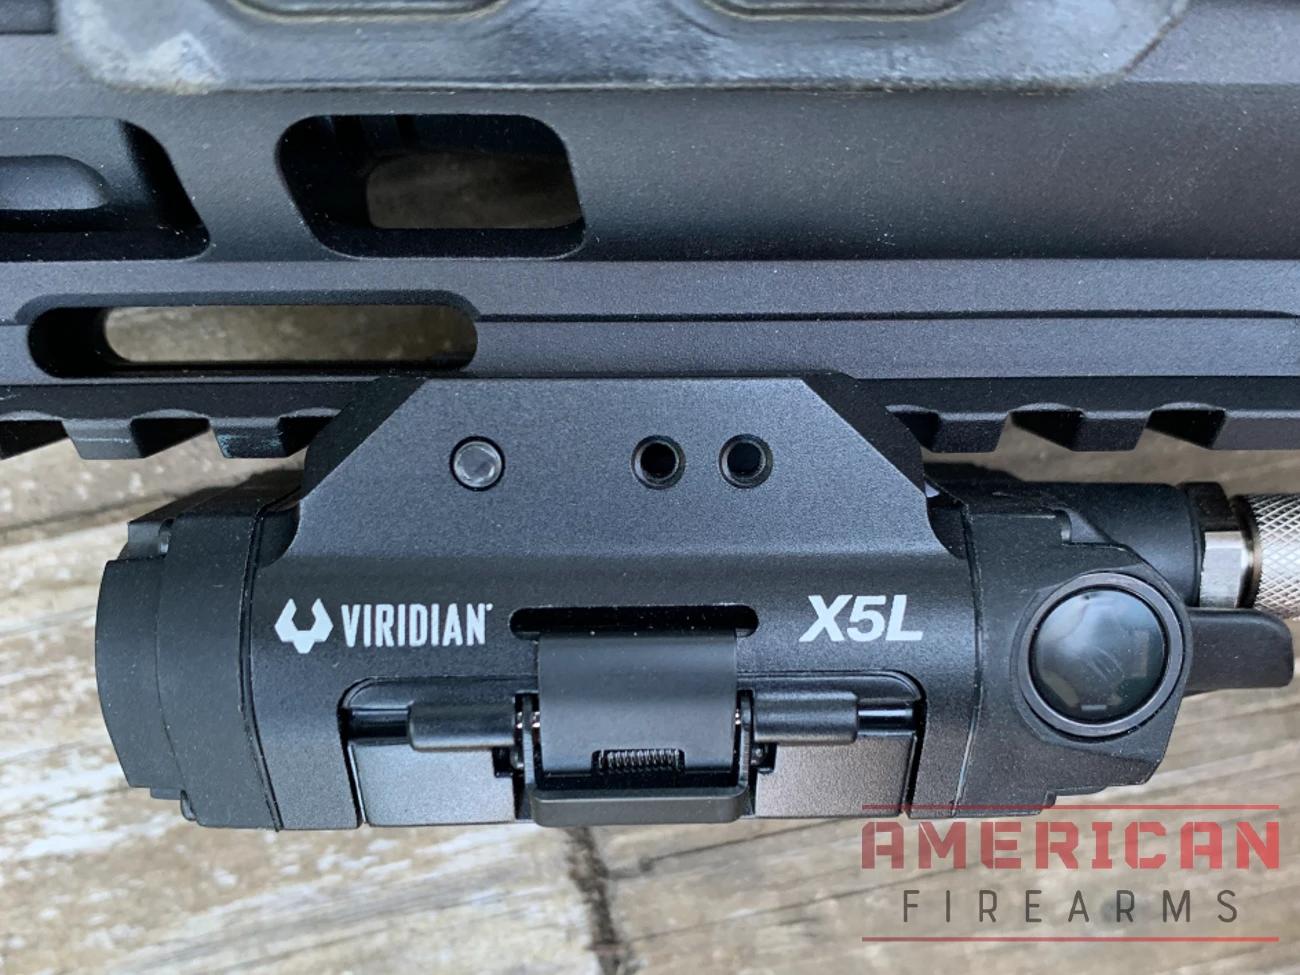 The X5L uses a Pic rail attachment clamp, which is secured with a screw. While not as convenient a throw lever, it's also more secure.